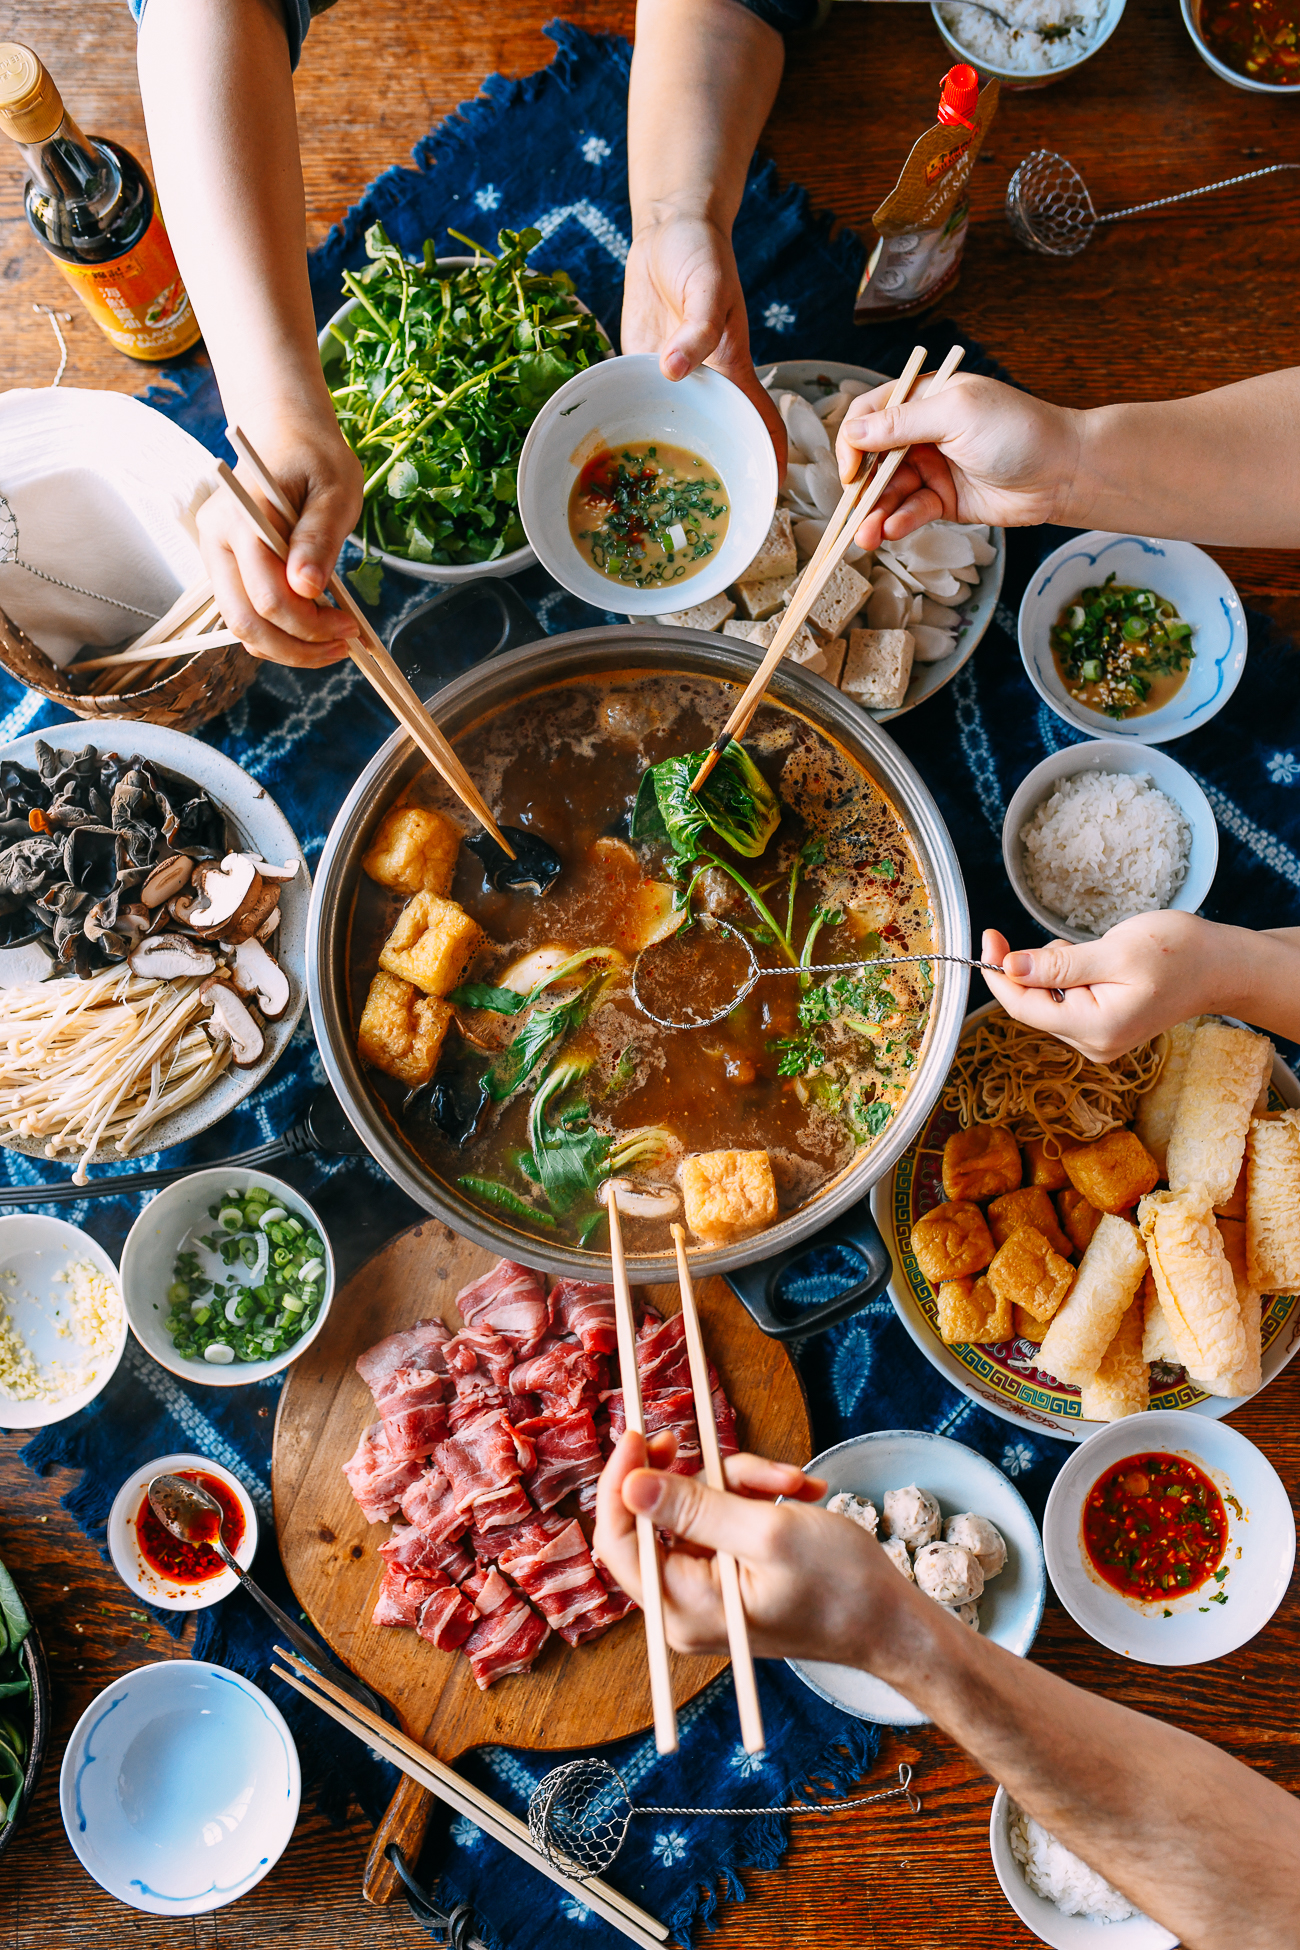 Asian Food Near Me Chinese Hot Pot at Home: How To! - The Woks of Life